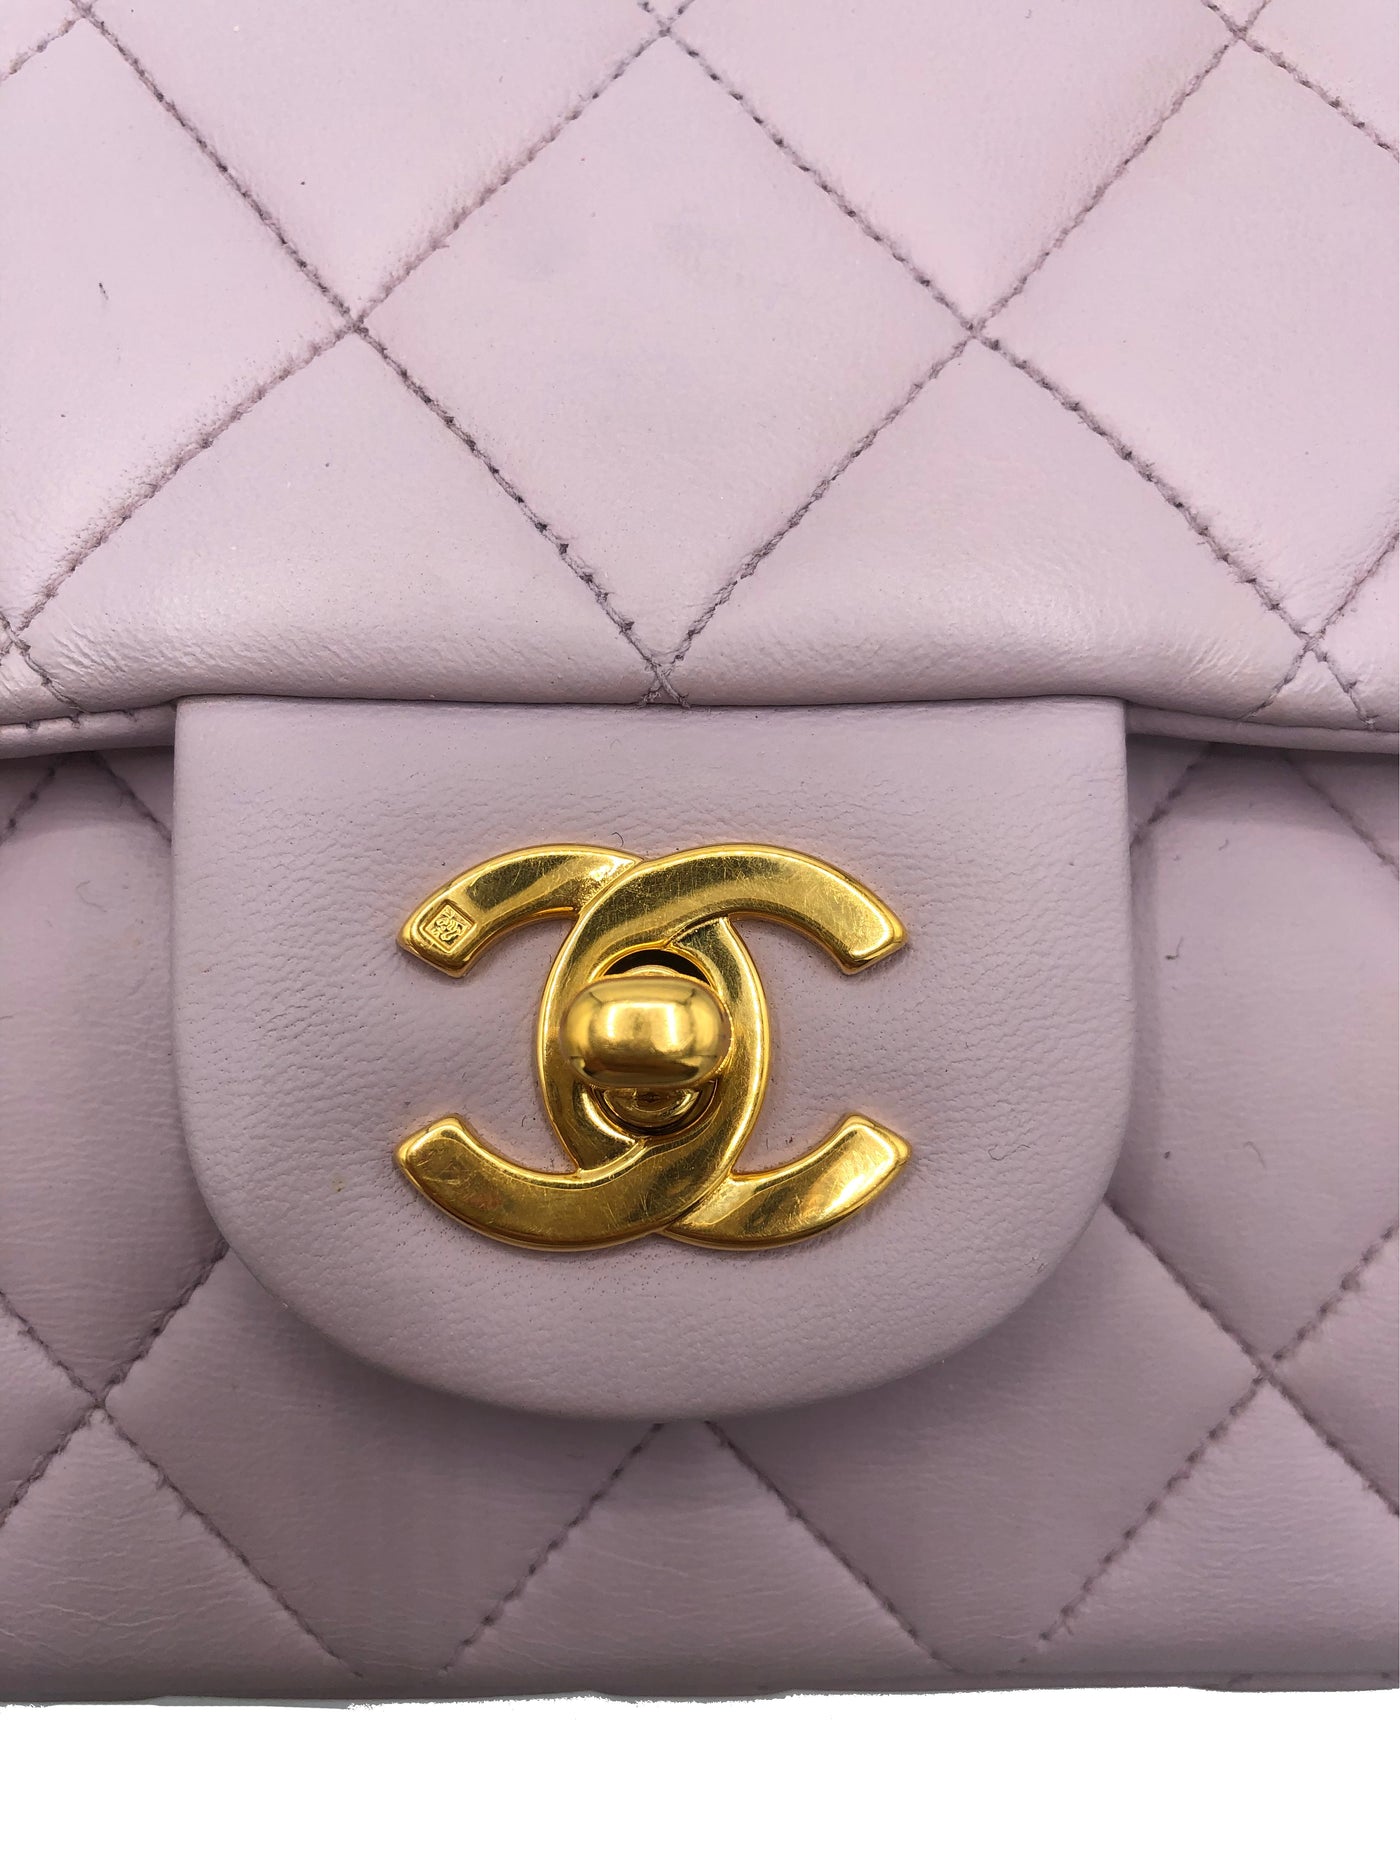 CHANEL Rare Vintage Lavender Classic Quilted Handbag with leather strap